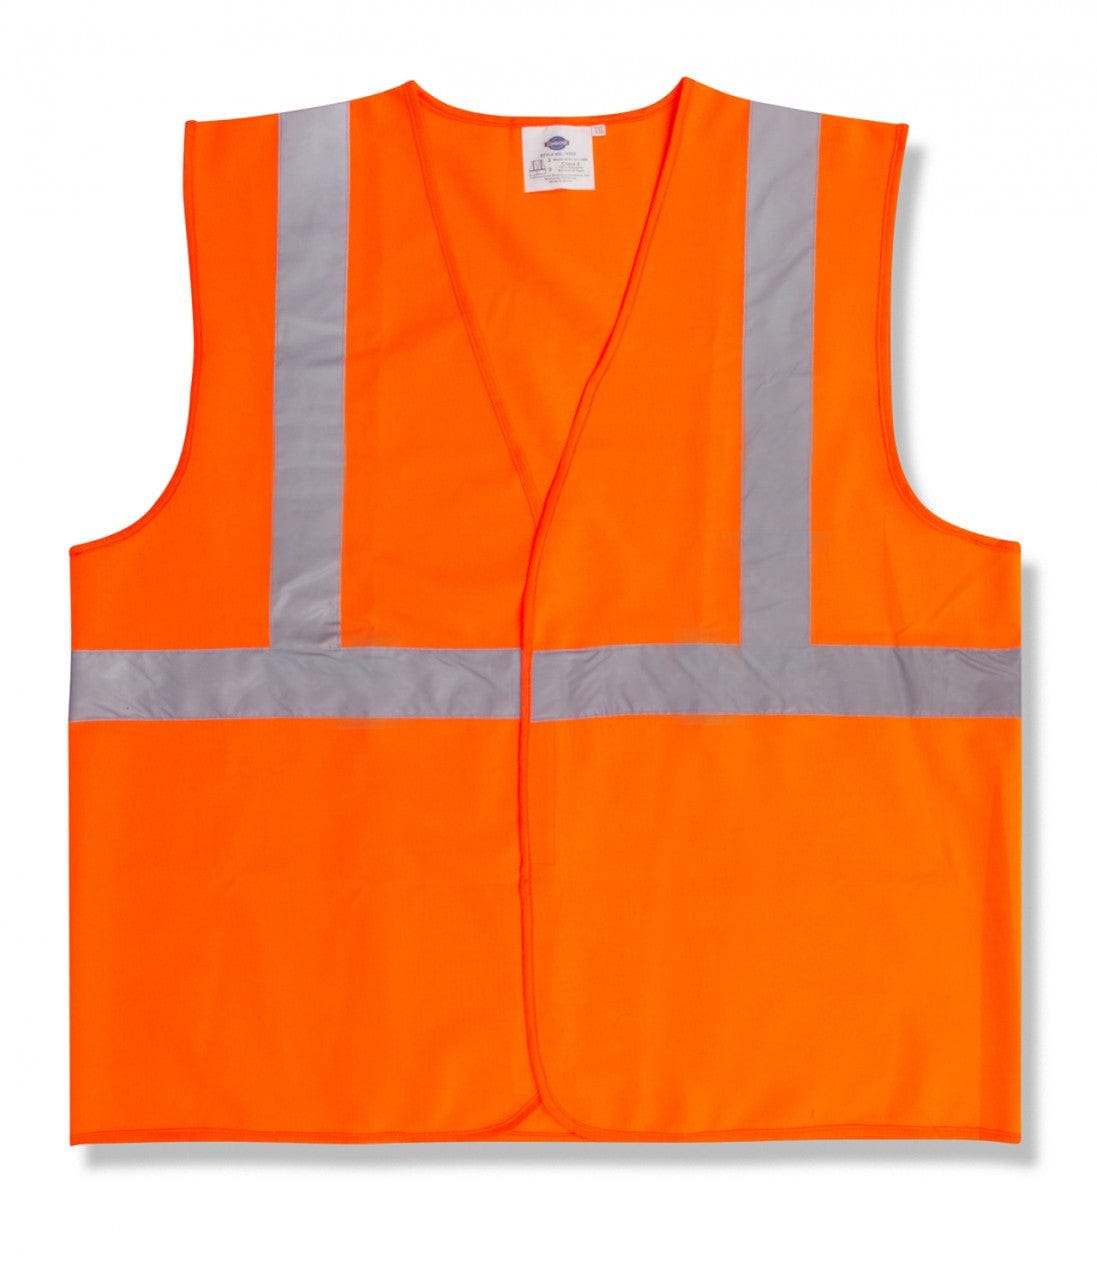 Get the best protection with our Class B Reflective Safety Vest in Orange. Perfect for high-risk work environments. - Buy Online on Supply Master Ghana, Accra Safety Clothing Buy Tools hardware Building materials